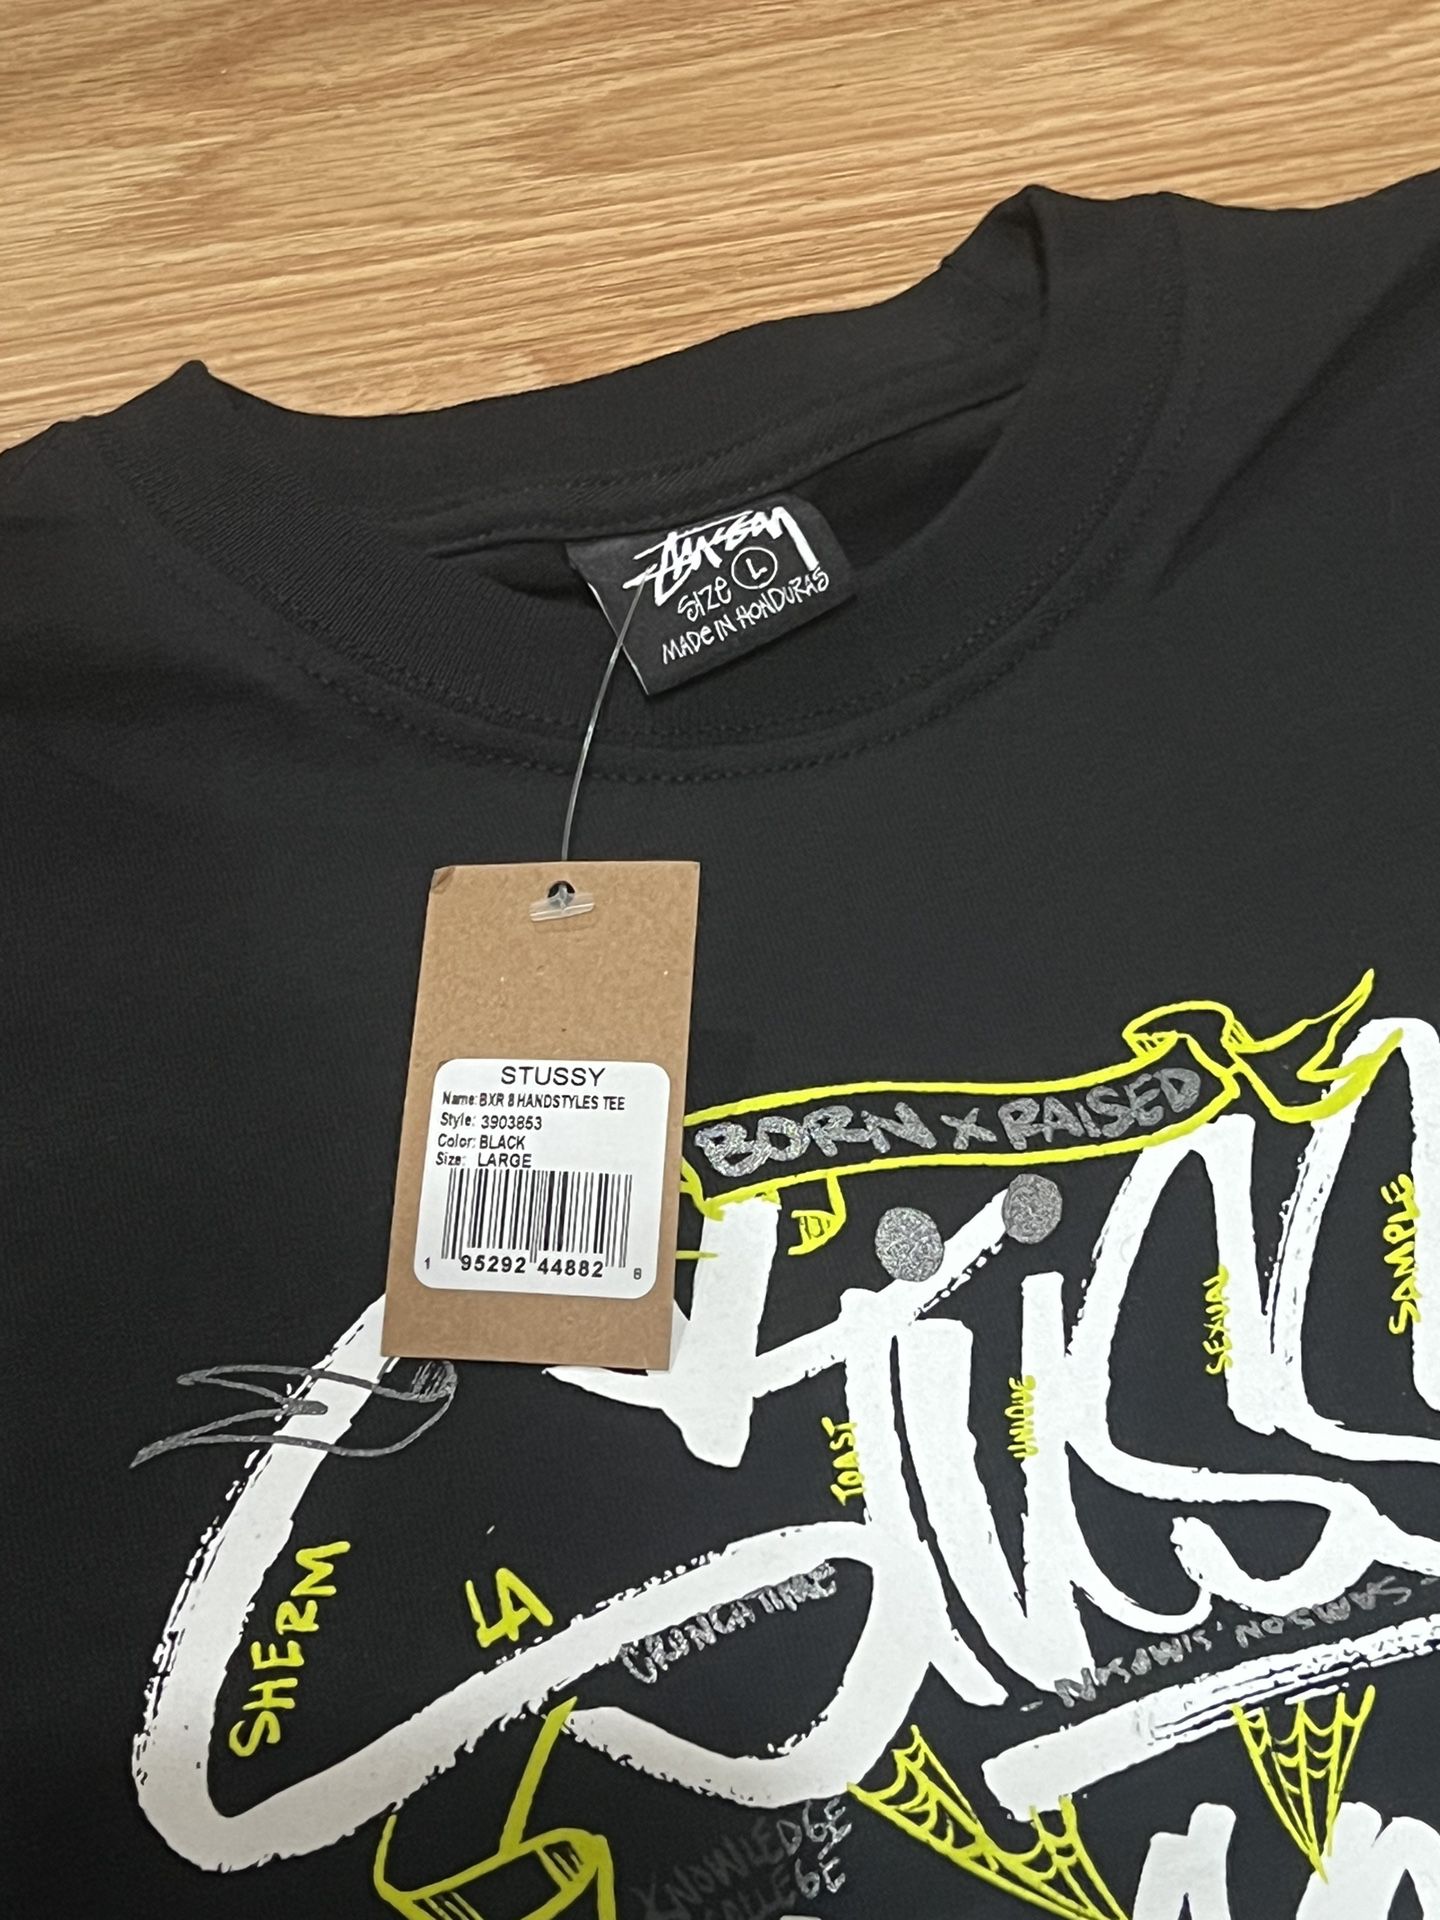 Stussy Born x Raised tee for Sale in Lakewood, CA - OfferUp